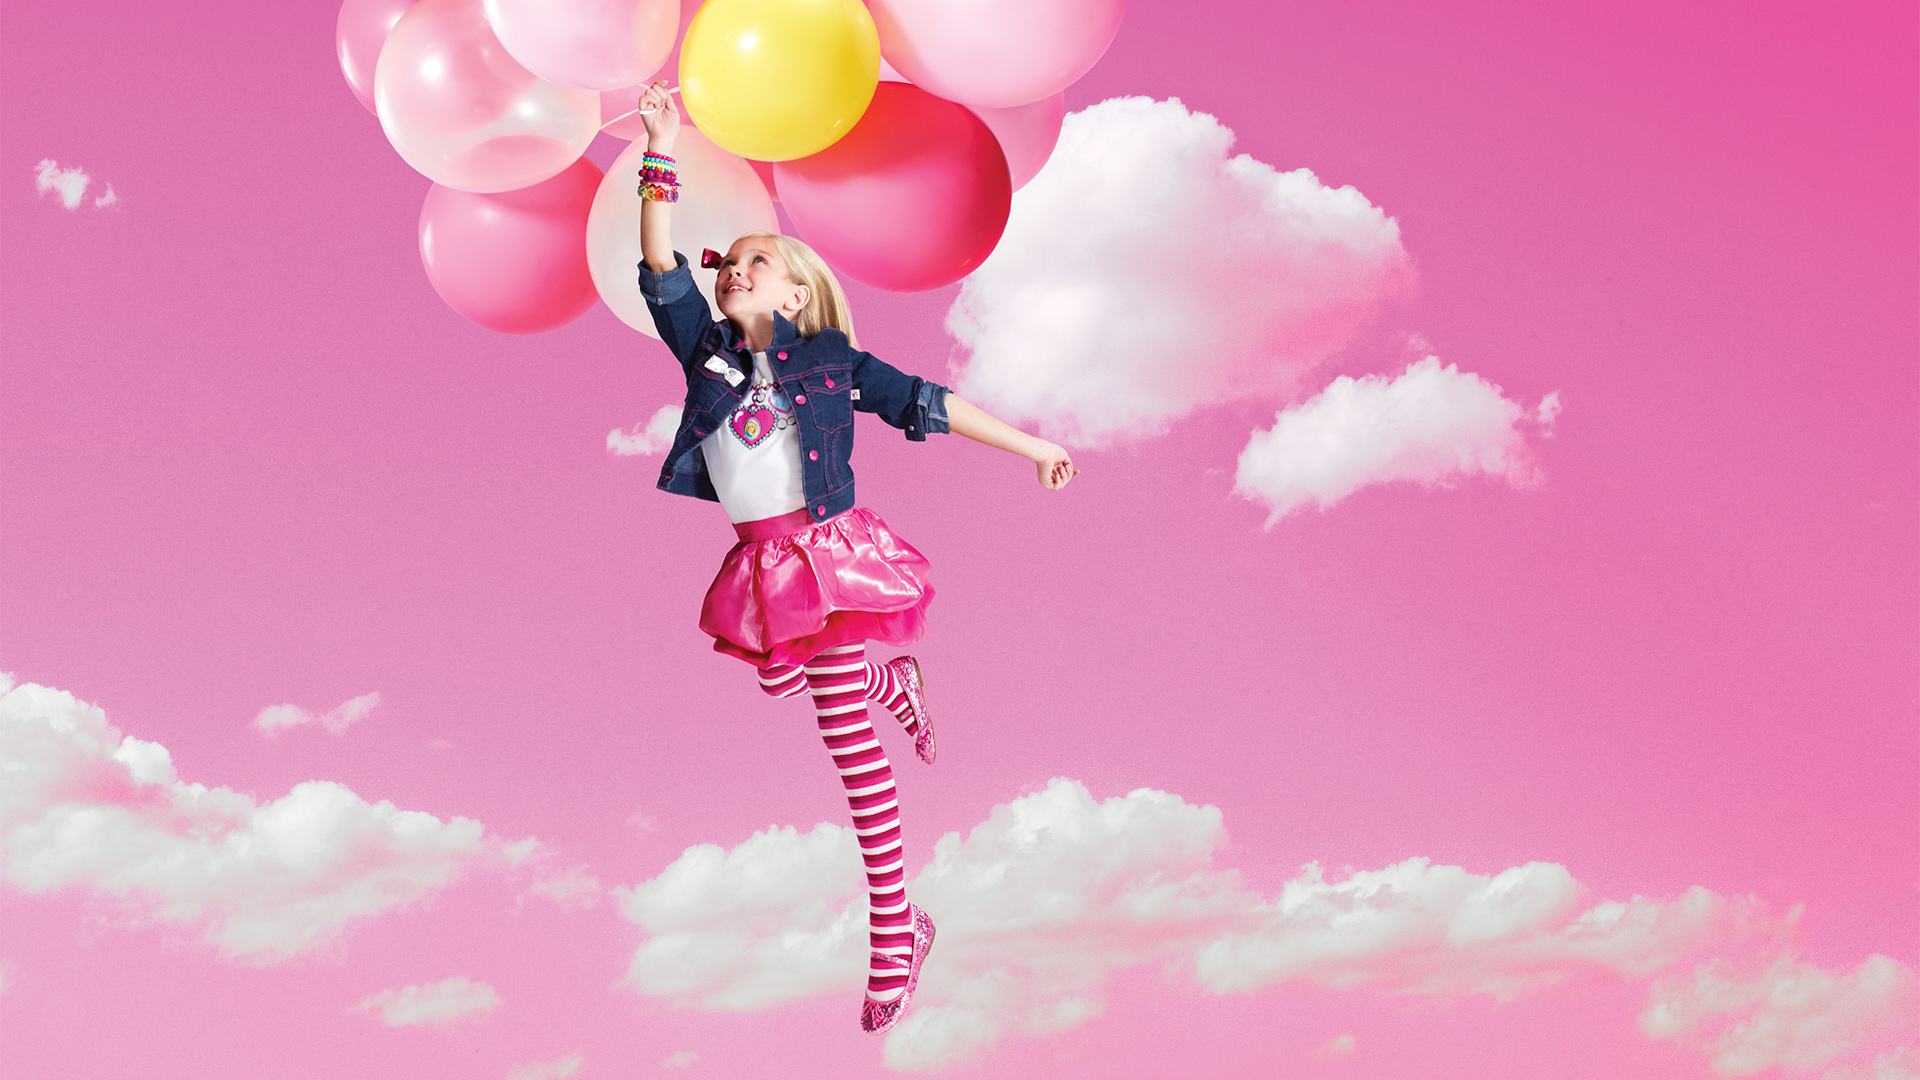 Barbie clothing on girl holding balloons flying up into the air